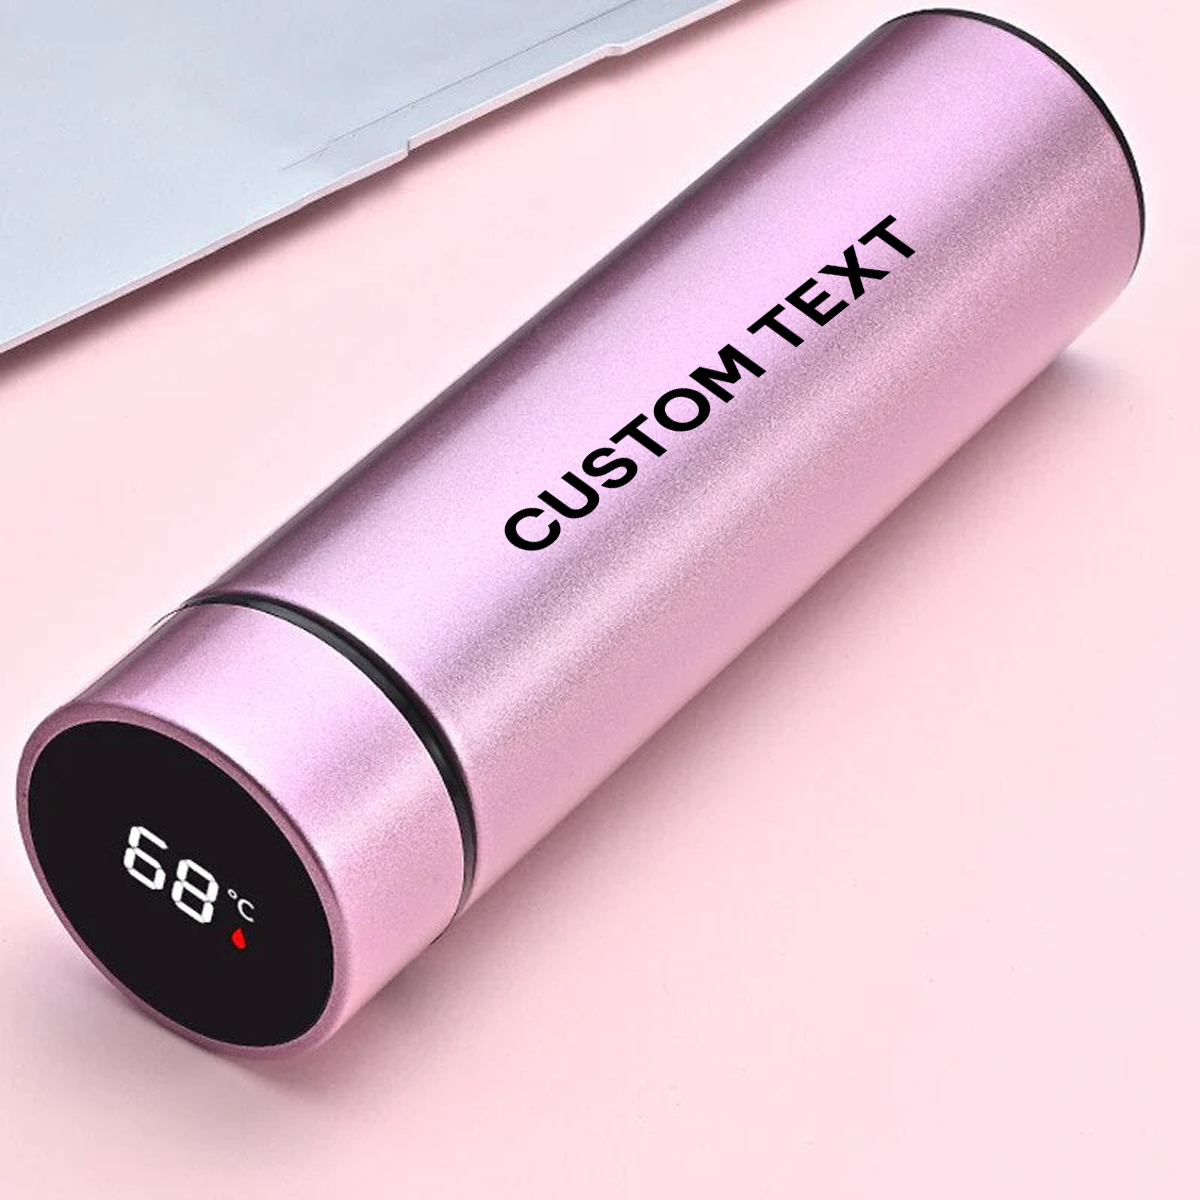 Custom Text and Logo 17oz Insulated Water Bottle with LED Temperature Display, Compatible with Ford, Coffee Tea Infuser Bottle Double Wall Vacuum Insulated Water Bottle for Hot or Cold Drink